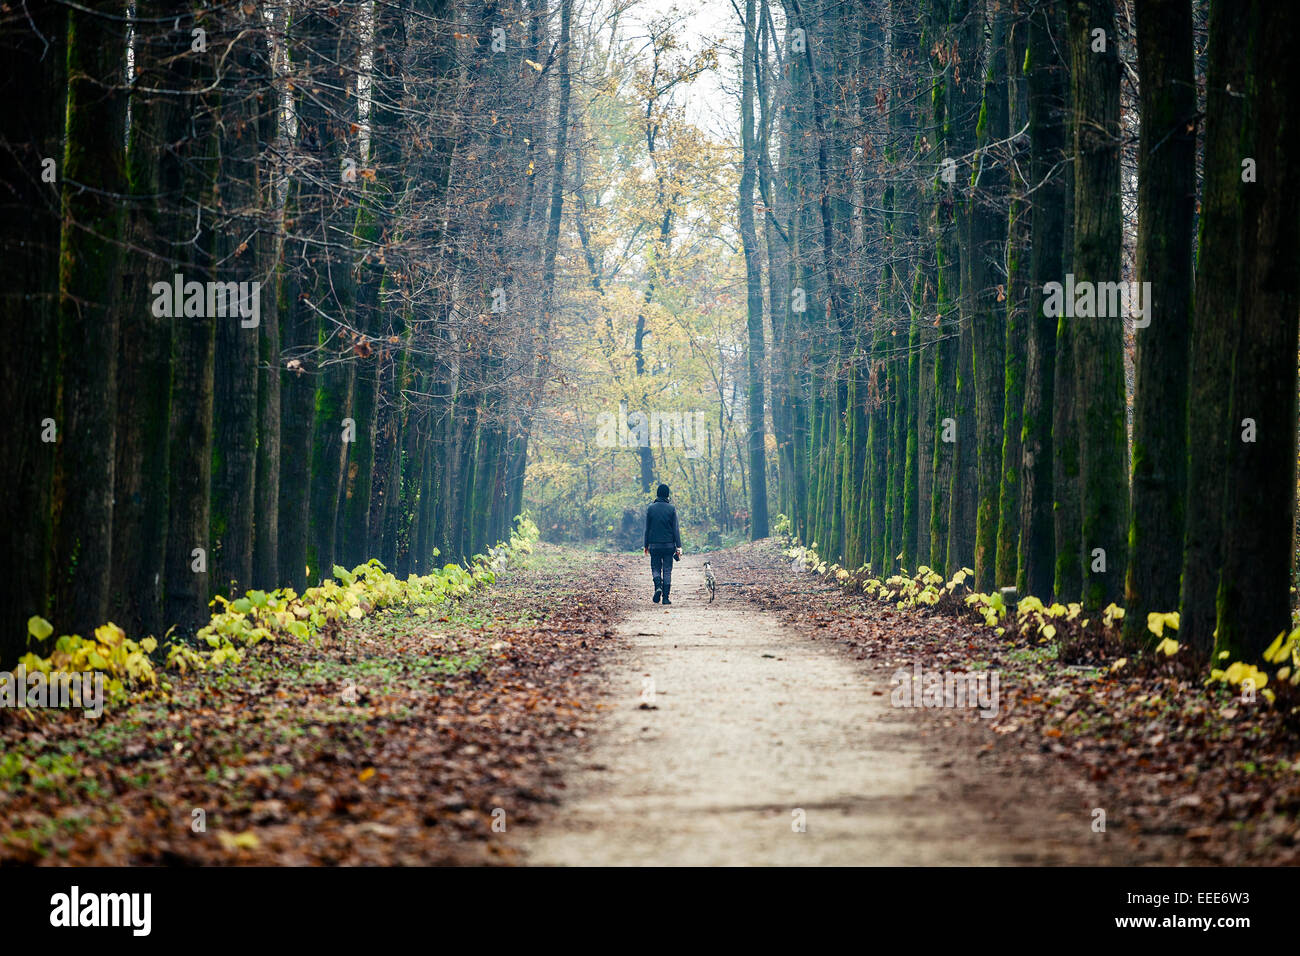 A young woman walking in the park with her dog during a foggy autumnal day Stock Photo